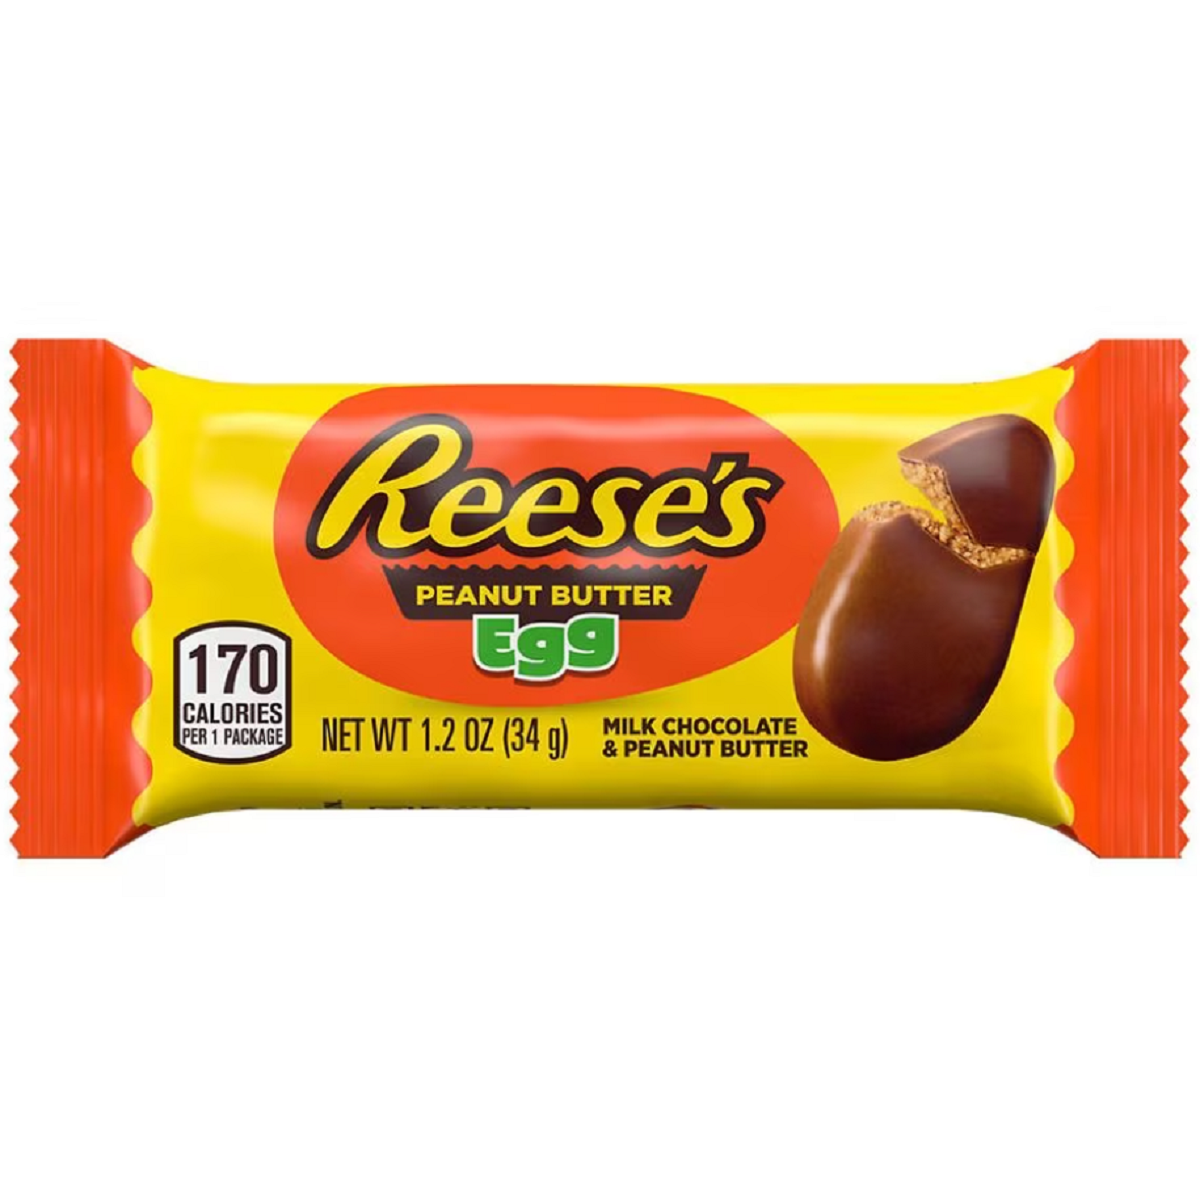 Buy (2) Hershey’s or Cadbury Easter Candy & Get $1 Off with myWalgreens